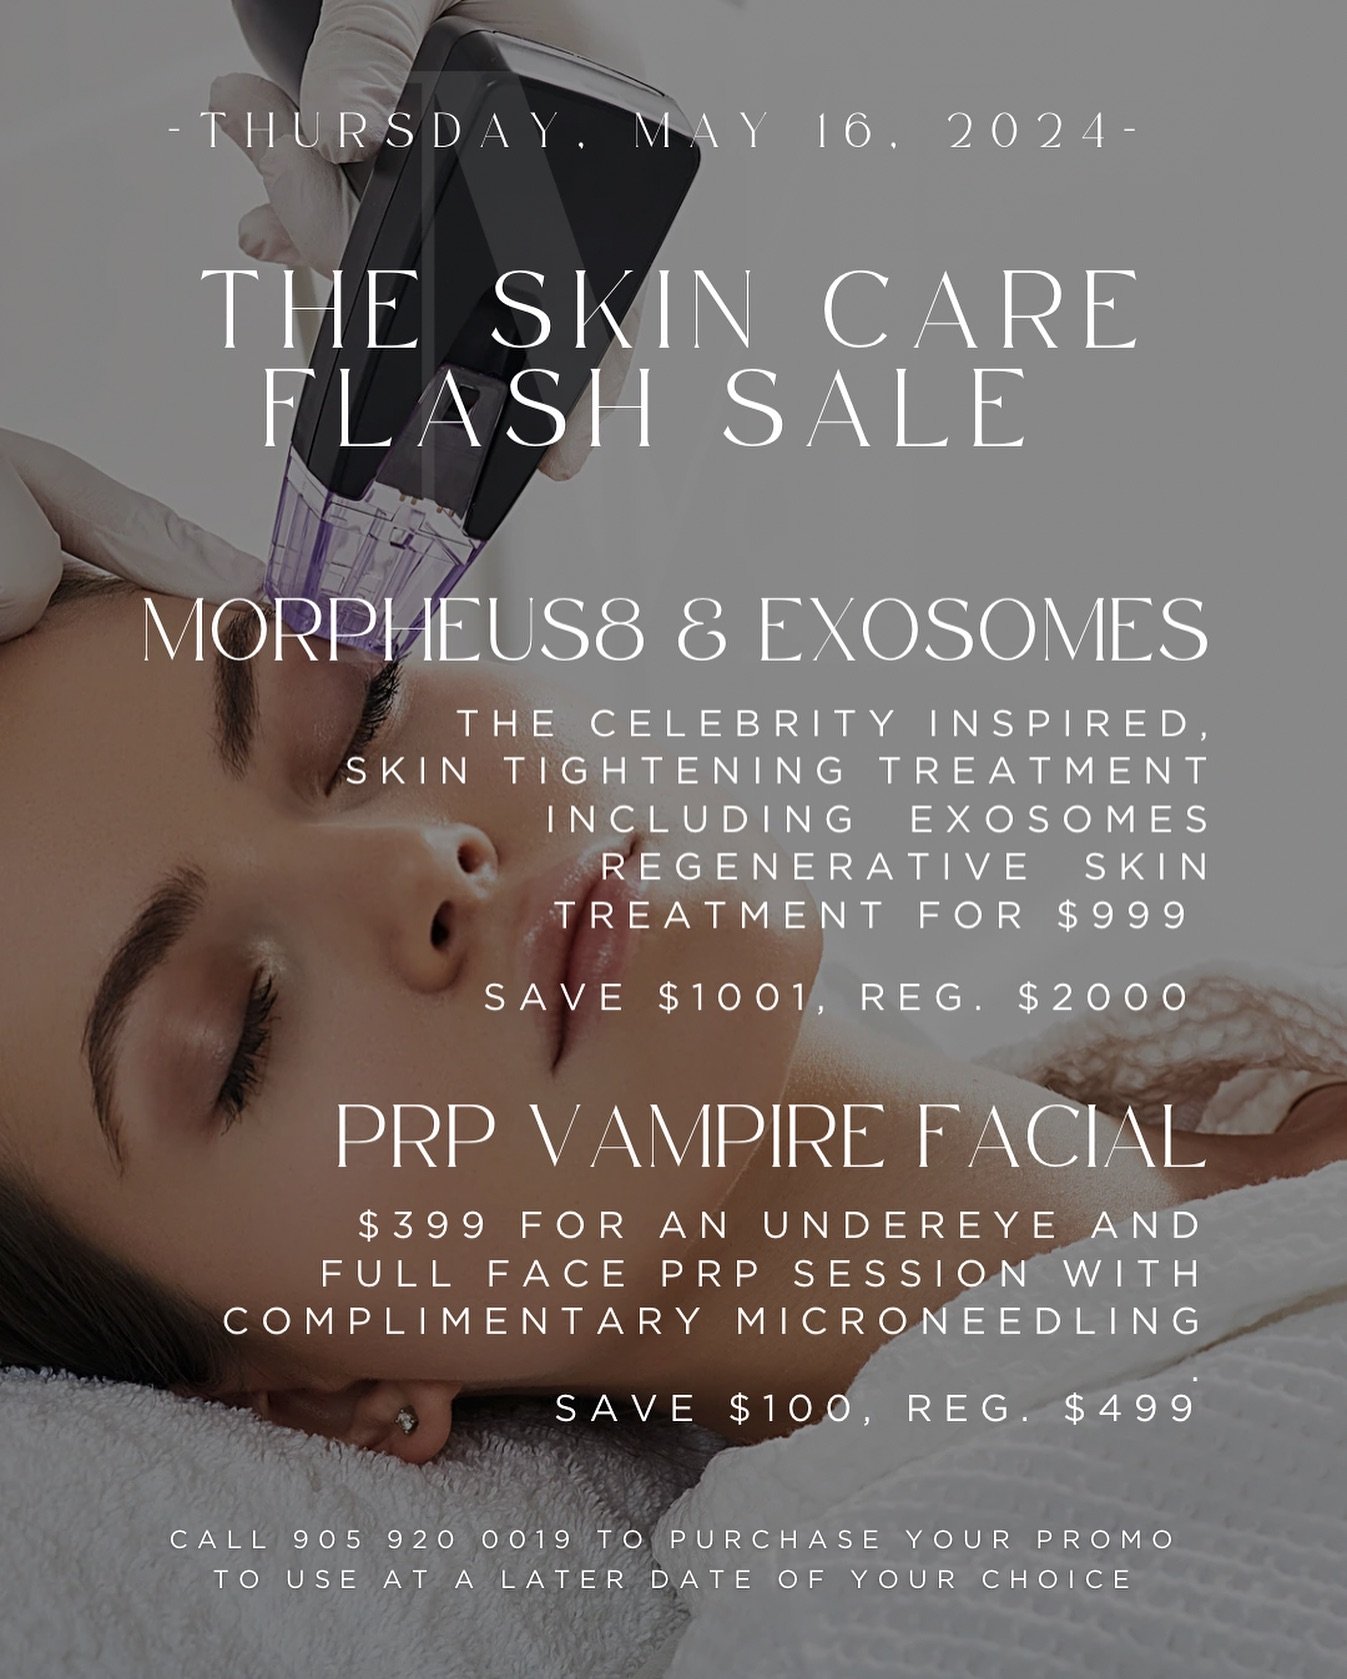 FLASH SALE 🚨 ONE DAY ONLY!

MORPHEUS 8 &amp; EXOSOMES - $999 per session, Save $1001

VAMPIRE FACIAL - $399 per session (Save $100)

Call 905 920 0019 to obtain these offers 💕